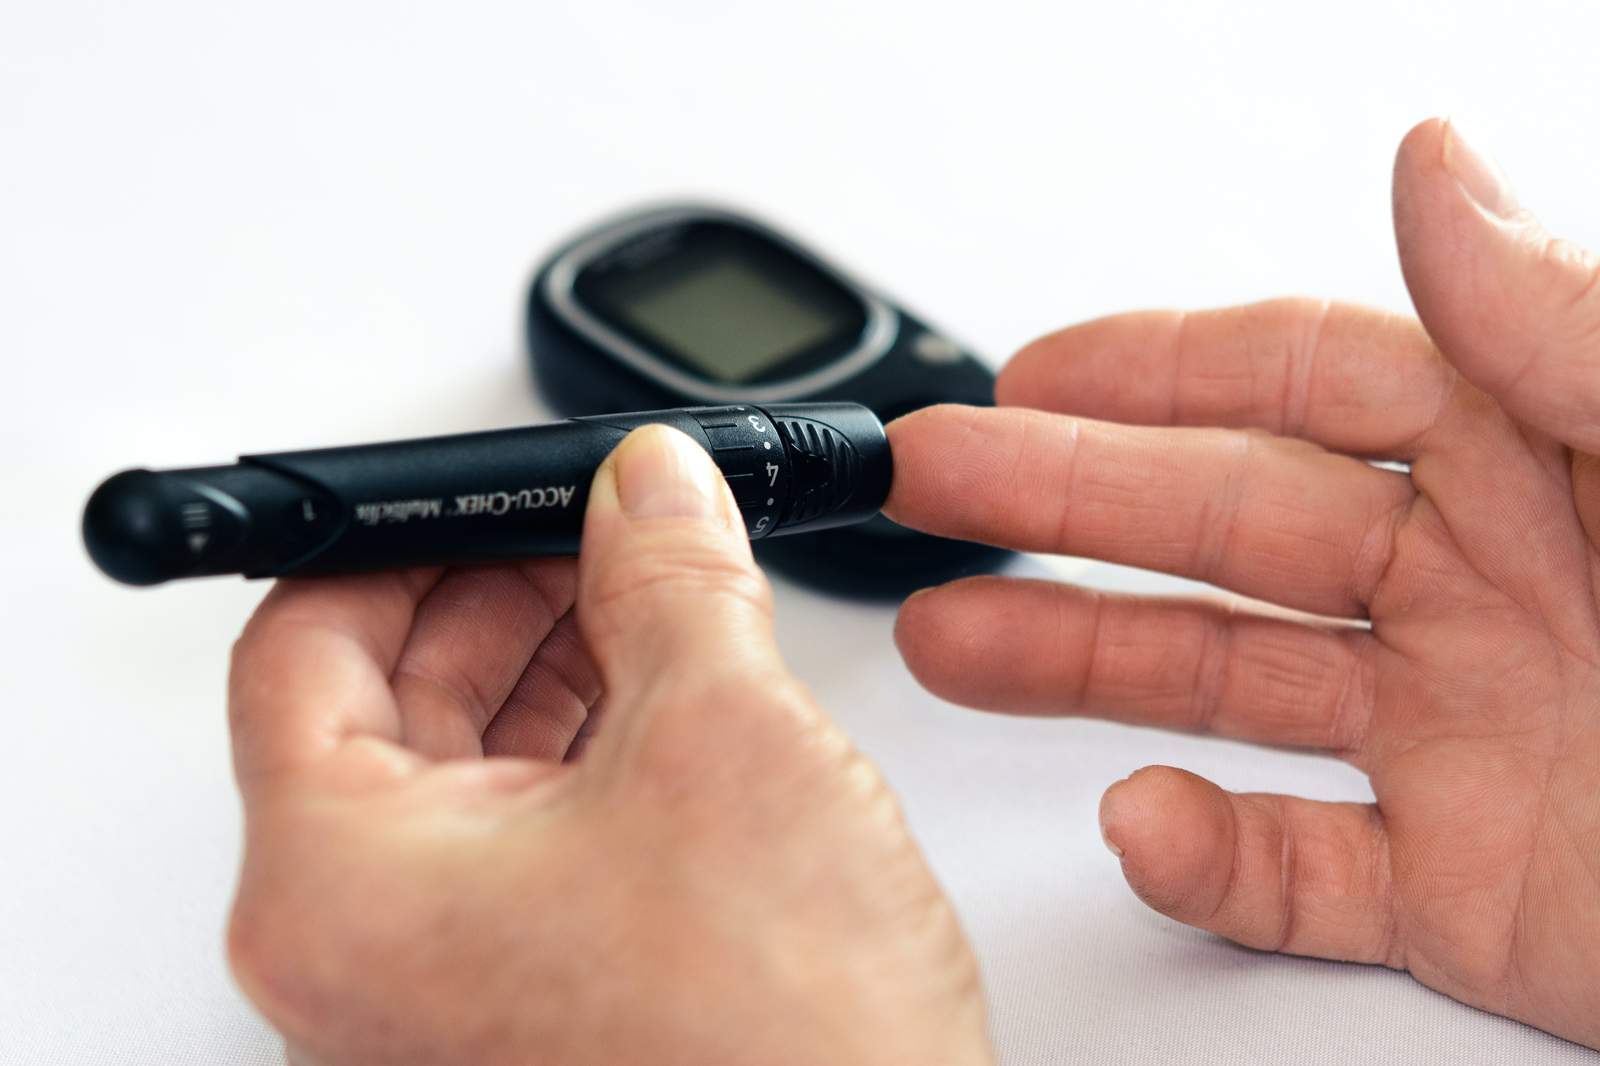 Everyone has heard of diabetes. But do you know the difference between Type 1 and Type 2?